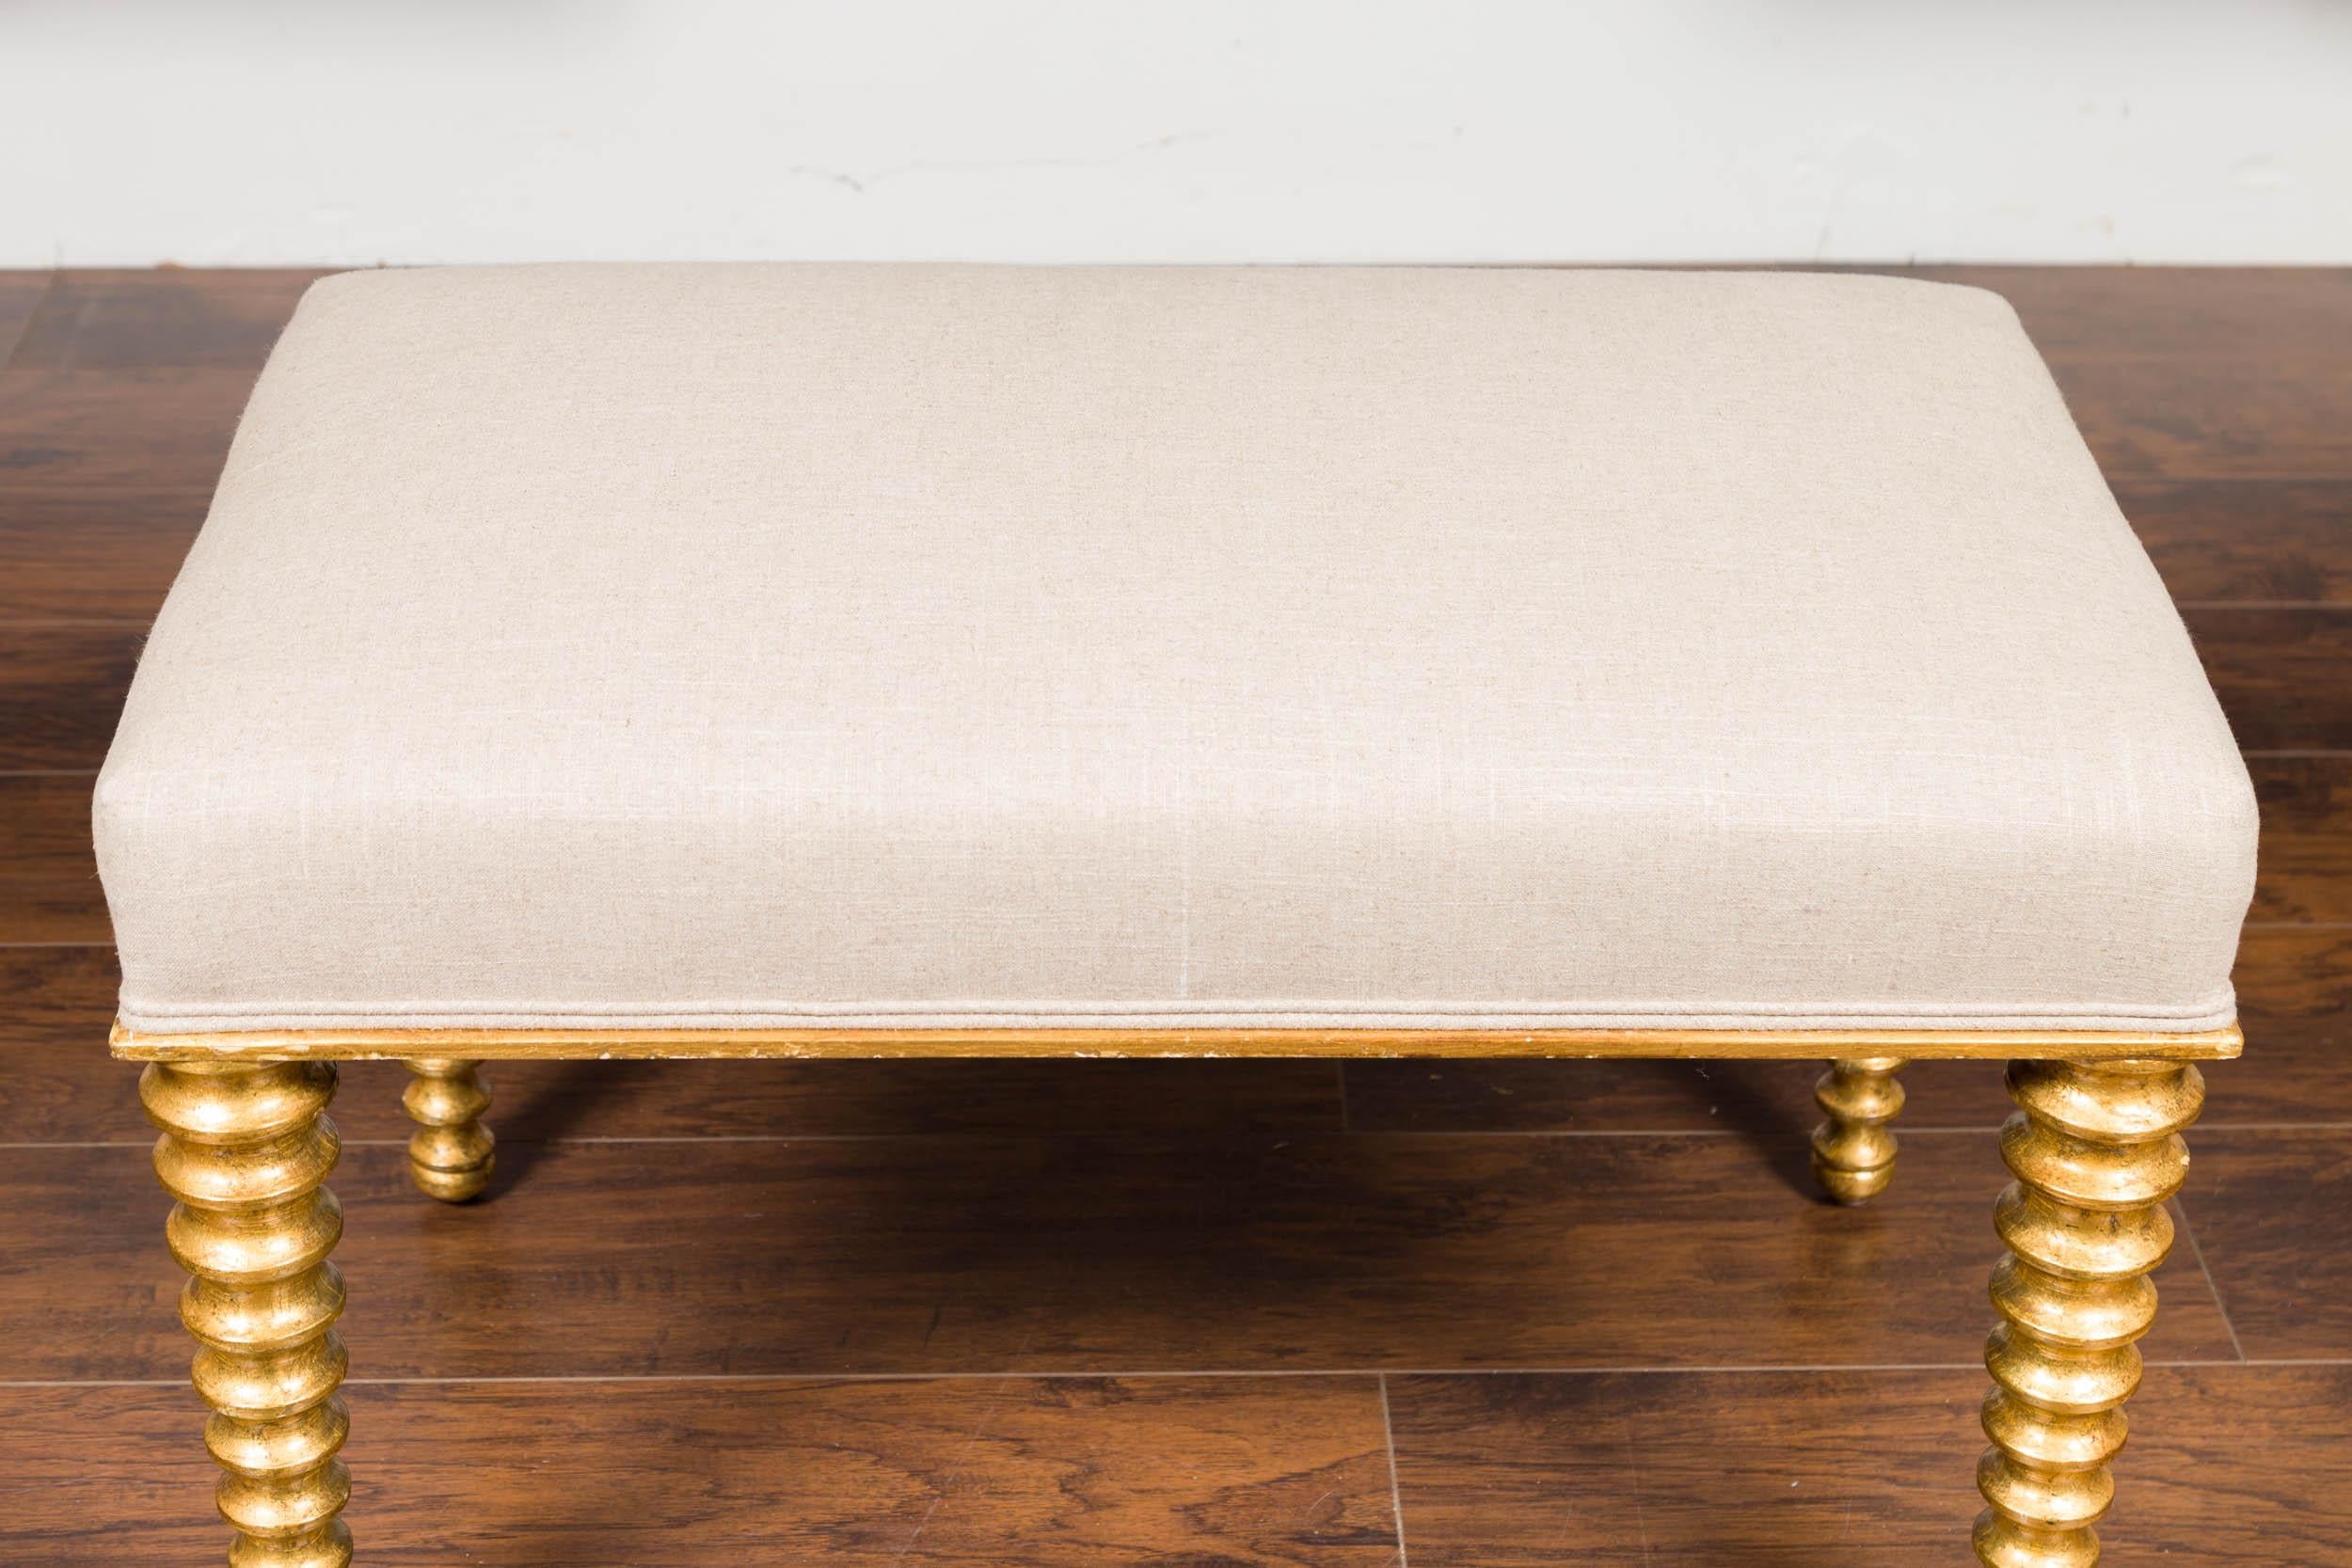 20th Century Vintage French Midcentury Giltwood Bench with Spool Legs and New Upholstery